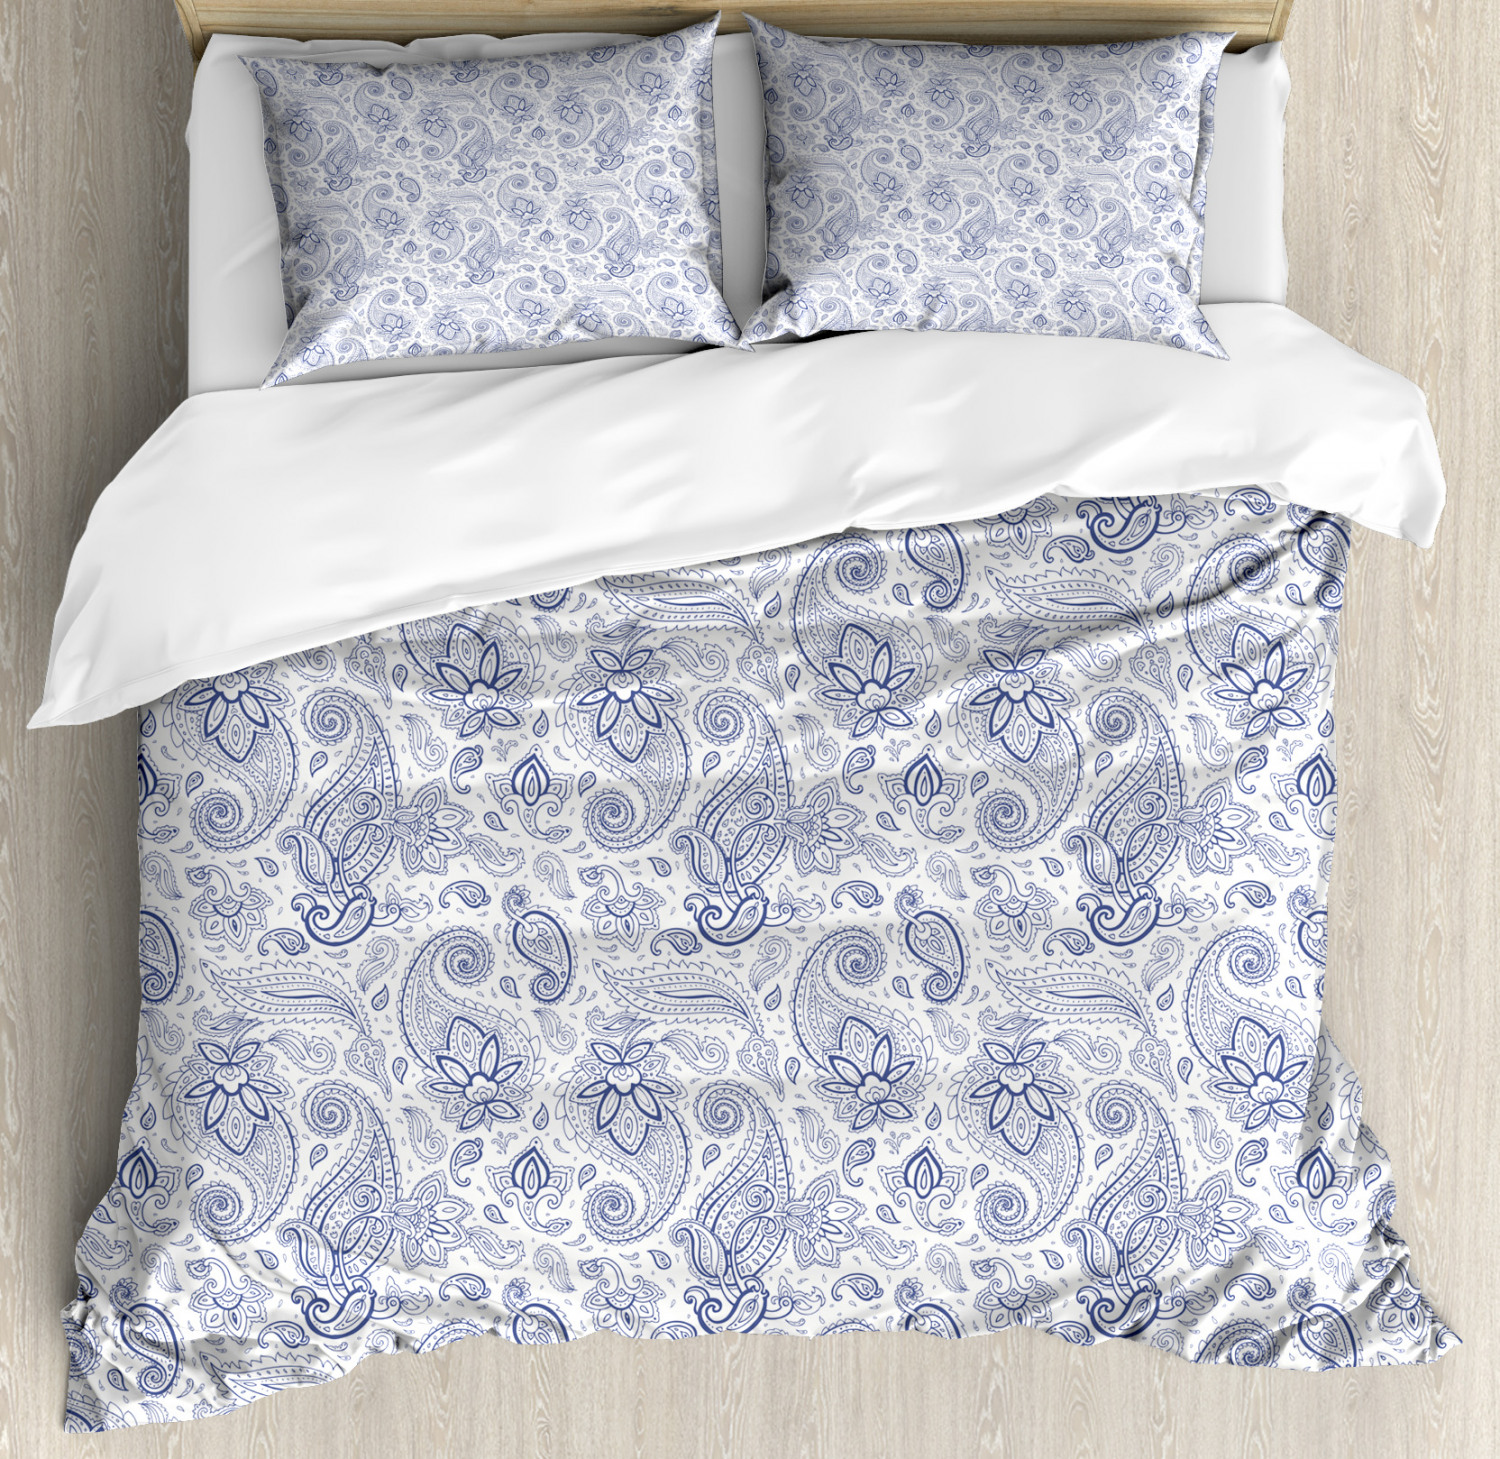 Paisley Duvet Cover Set With Pillow Shams Abstract Buds And Dots